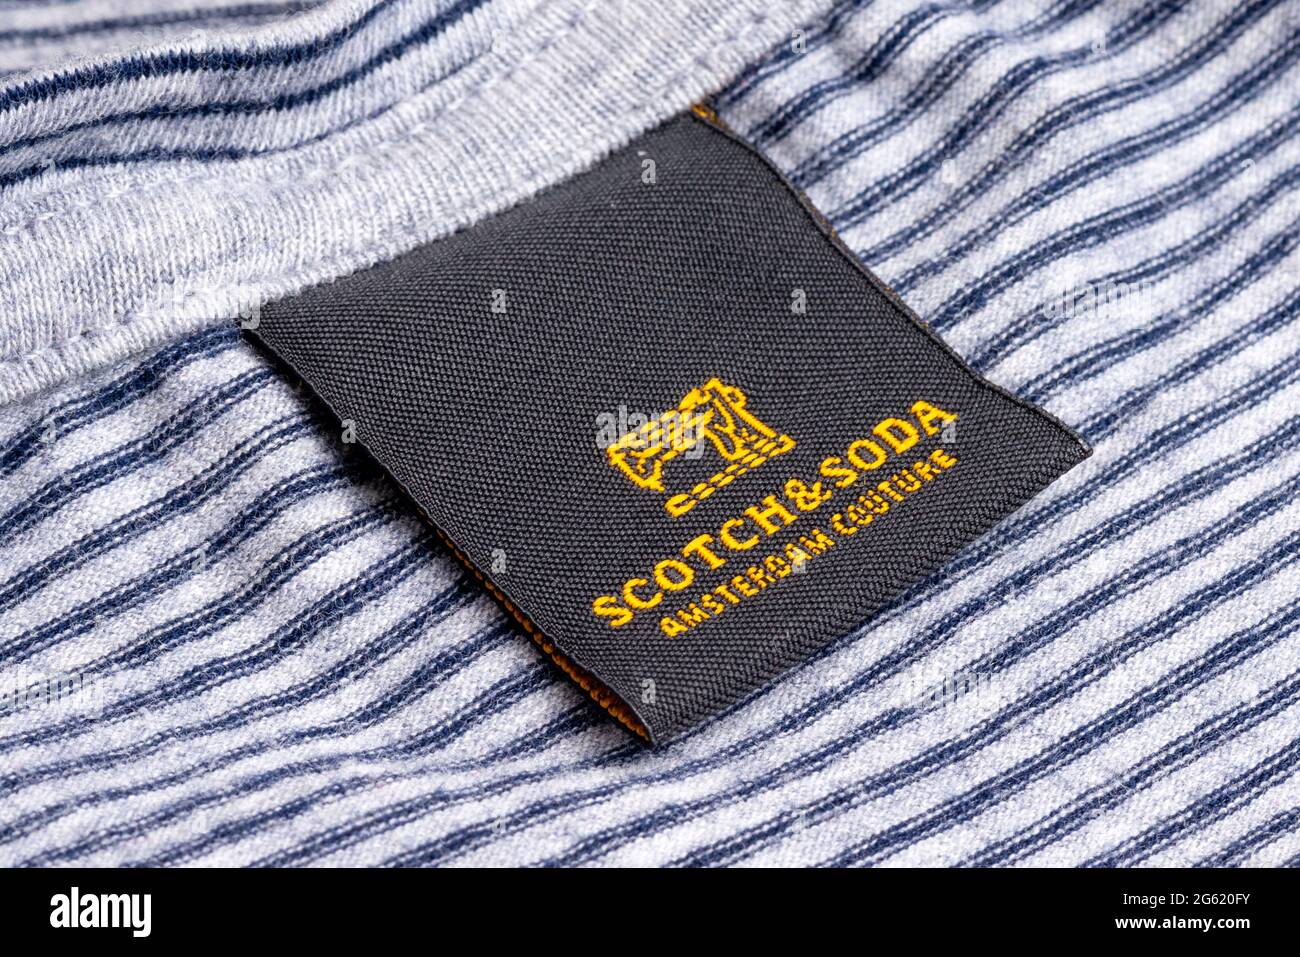 Clothing label for Scotch and Soda garment Stock Photo - Alamy